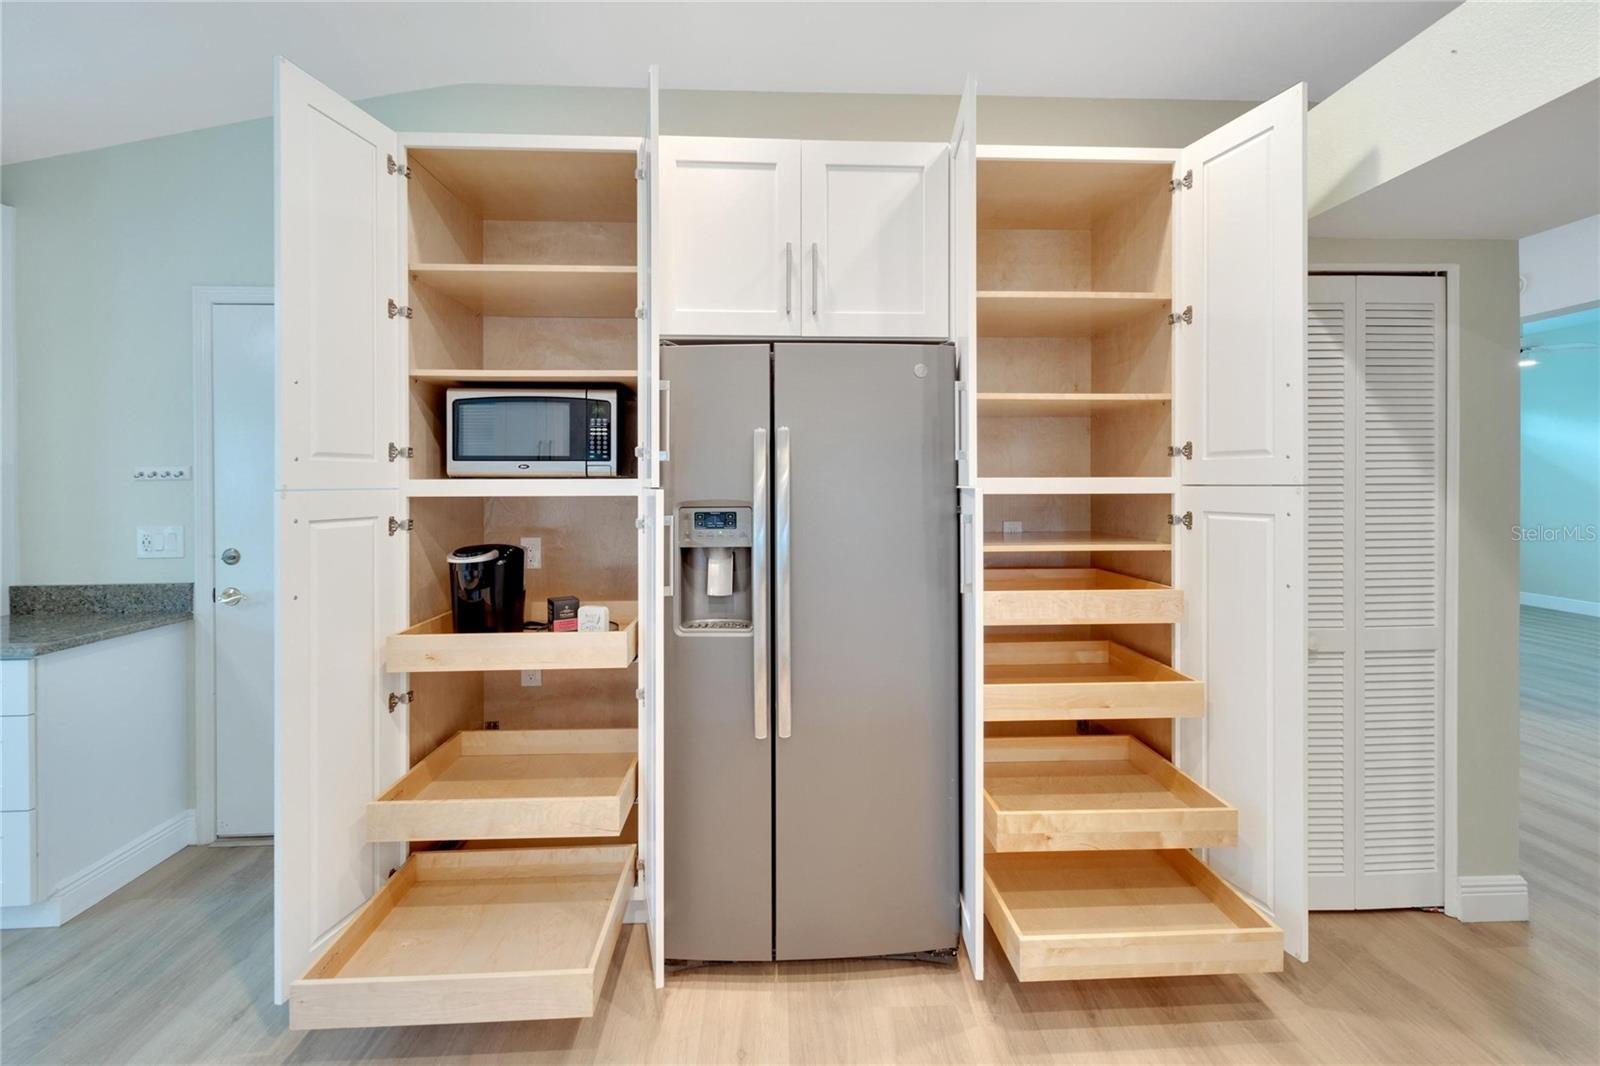 Many pull out drawers for pantry/small appliances, complete with electrical outlets installed